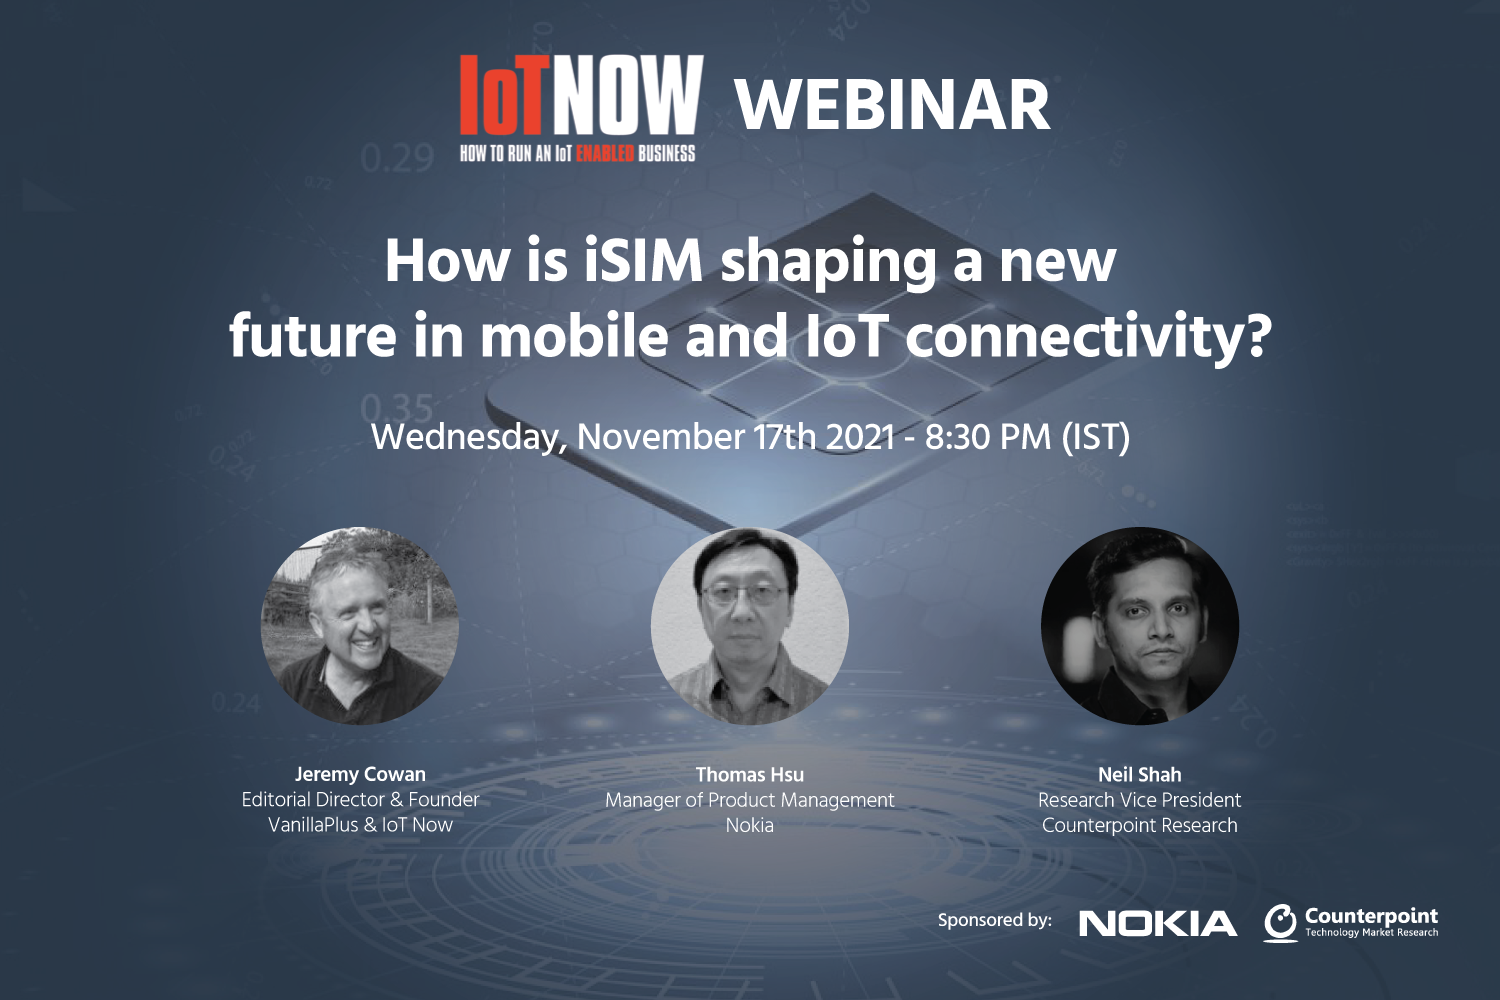 Webinar: How is iSIM shaping a new future in mobile and IoT connectivity?